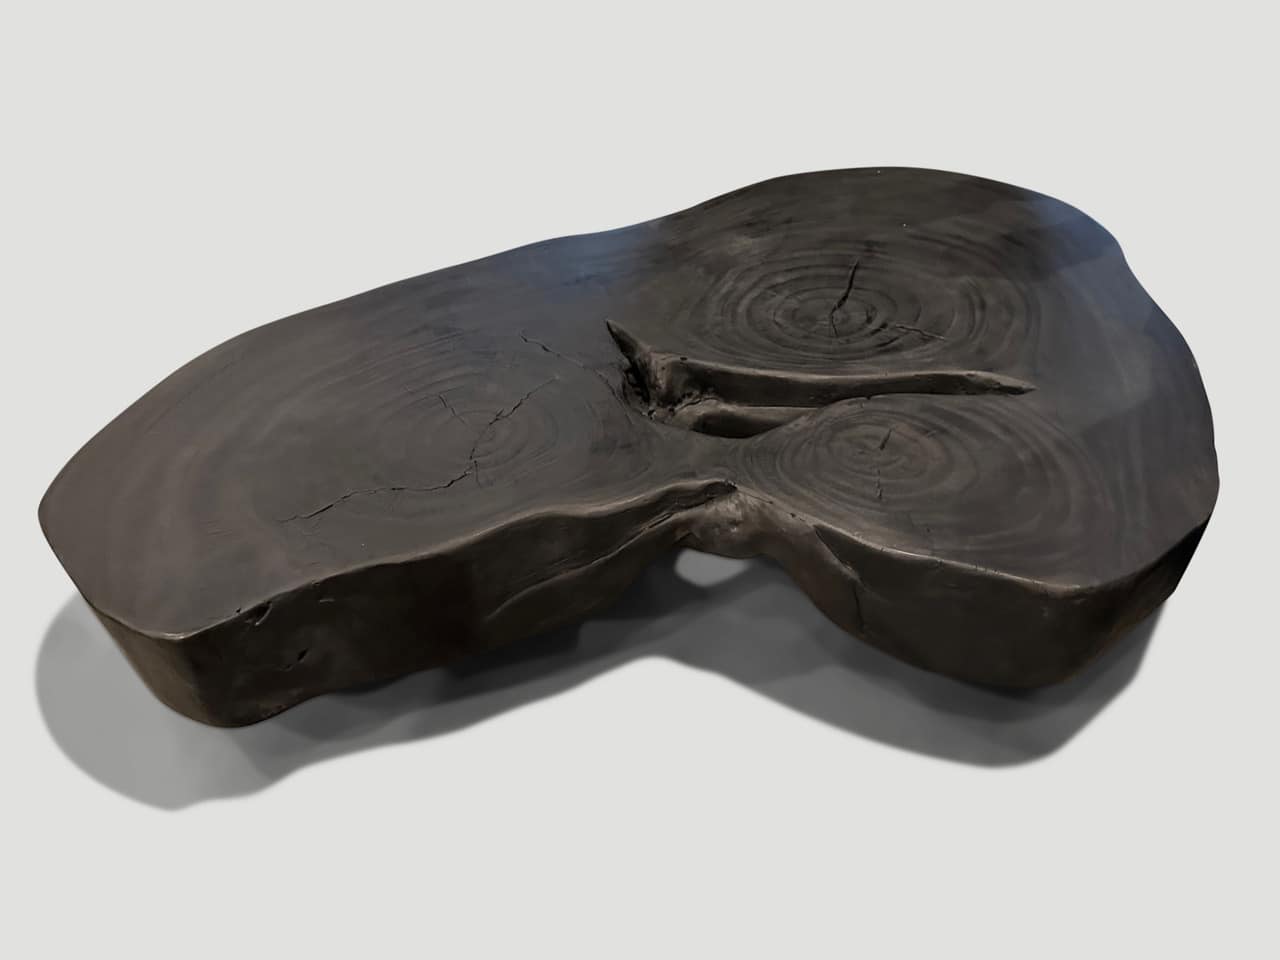 hand carved reclaimed suar wood coffee table